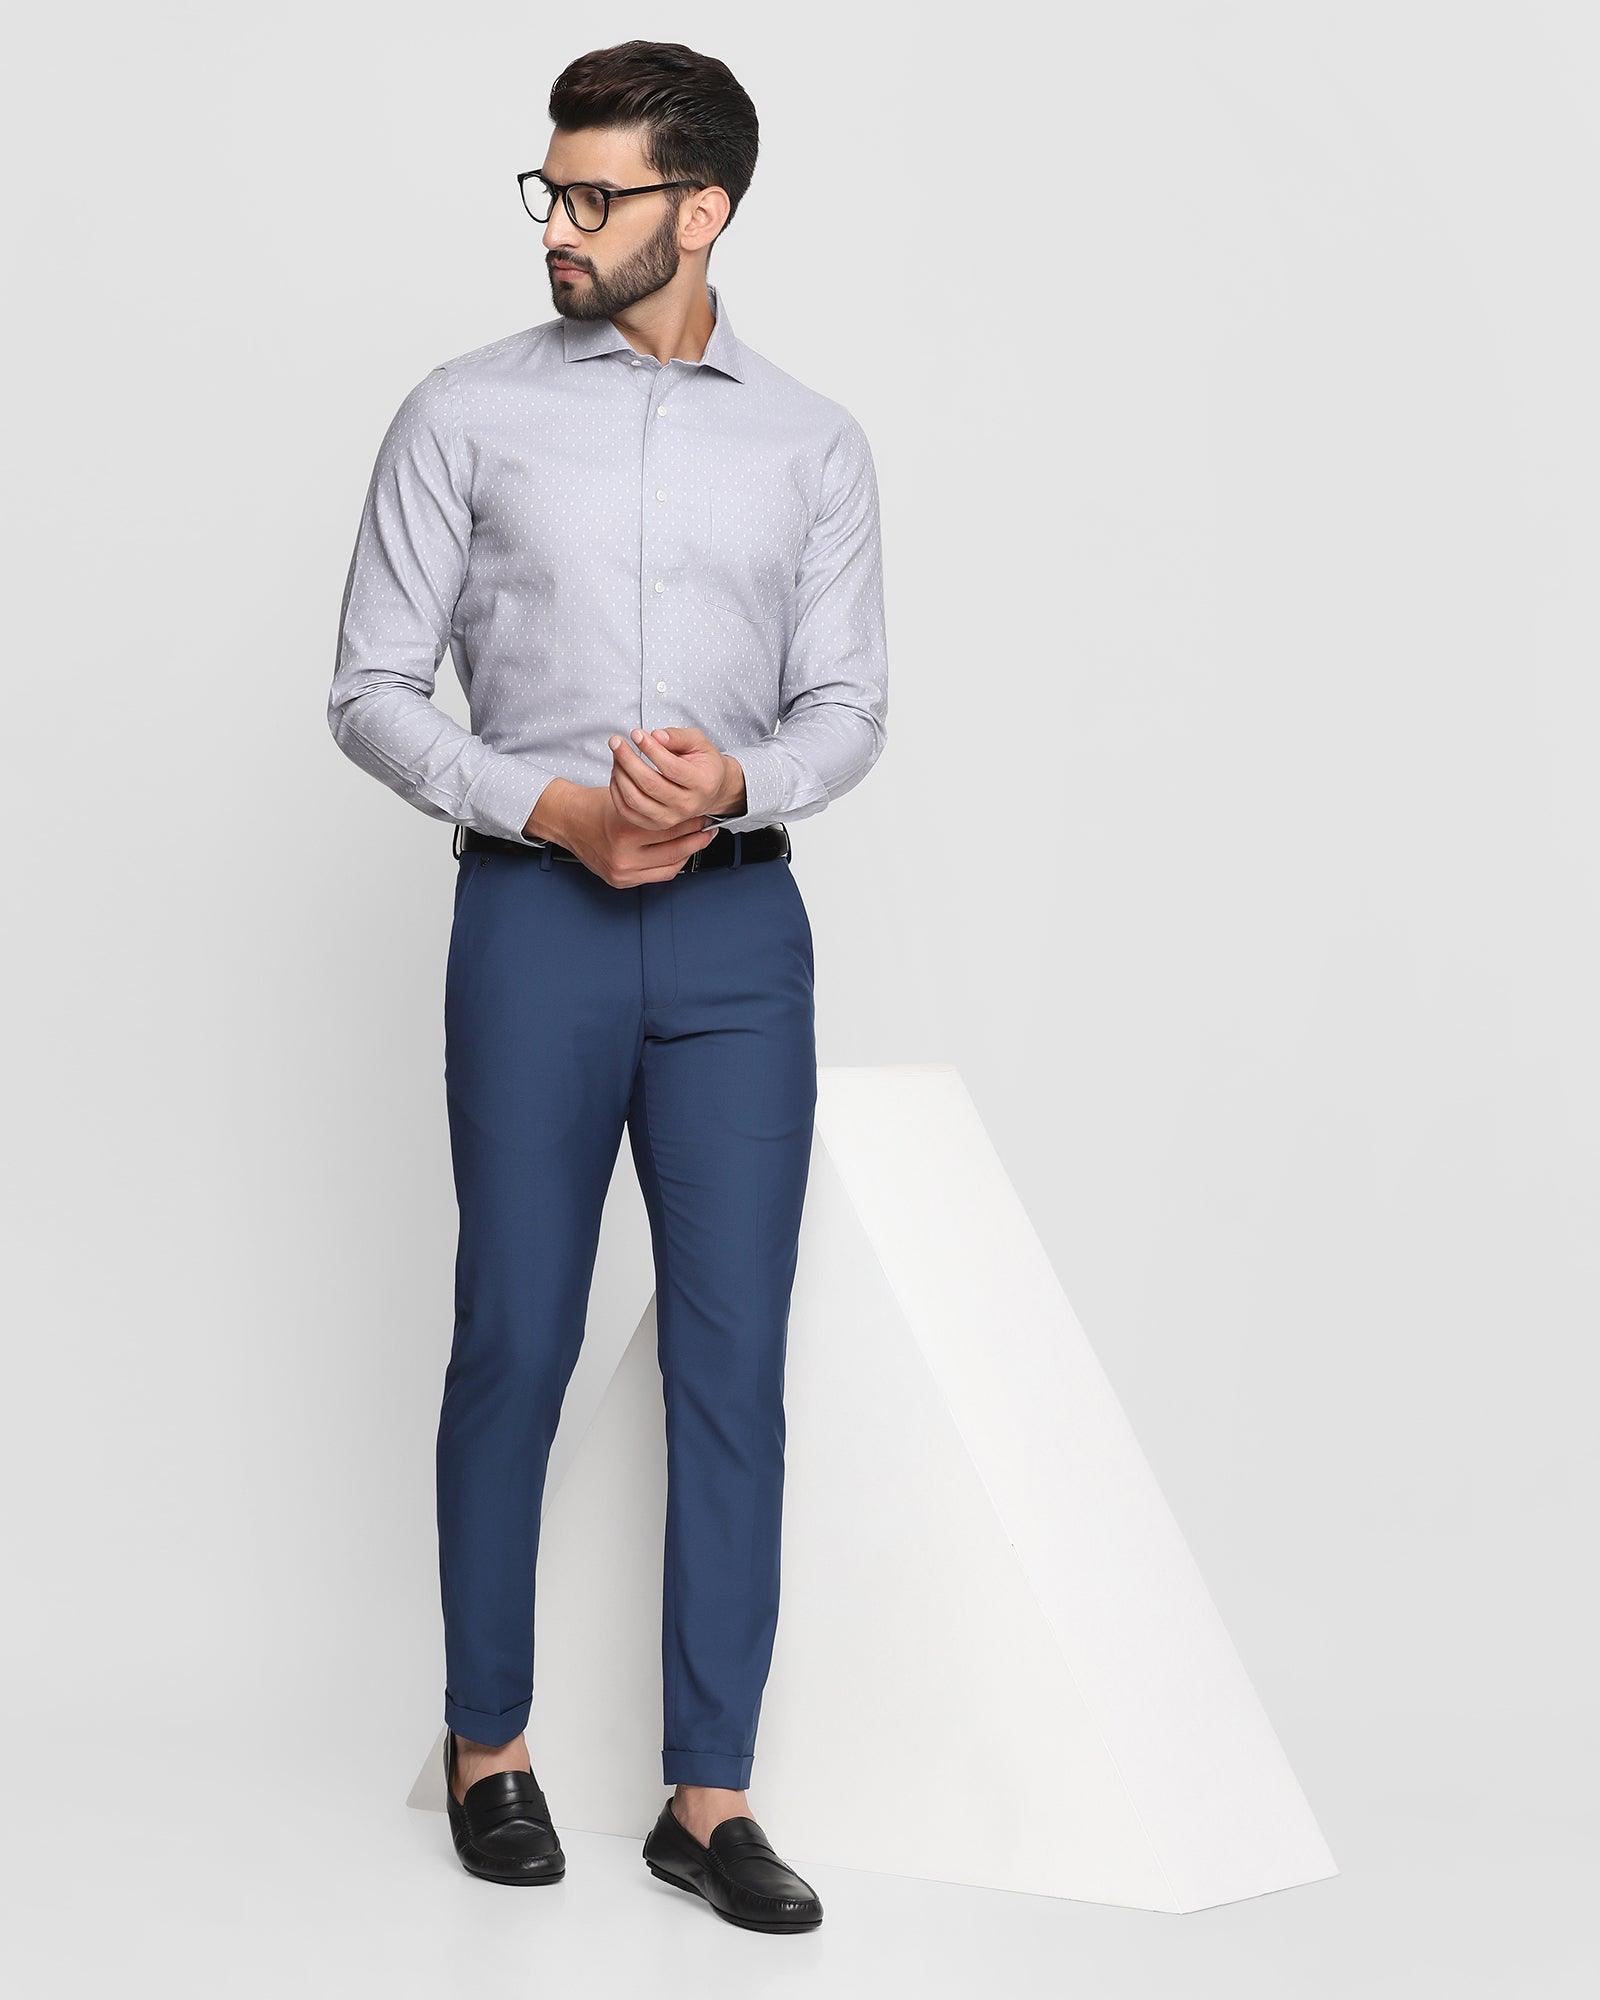 Buy The 24 Marble Grey Trouser | Beyours